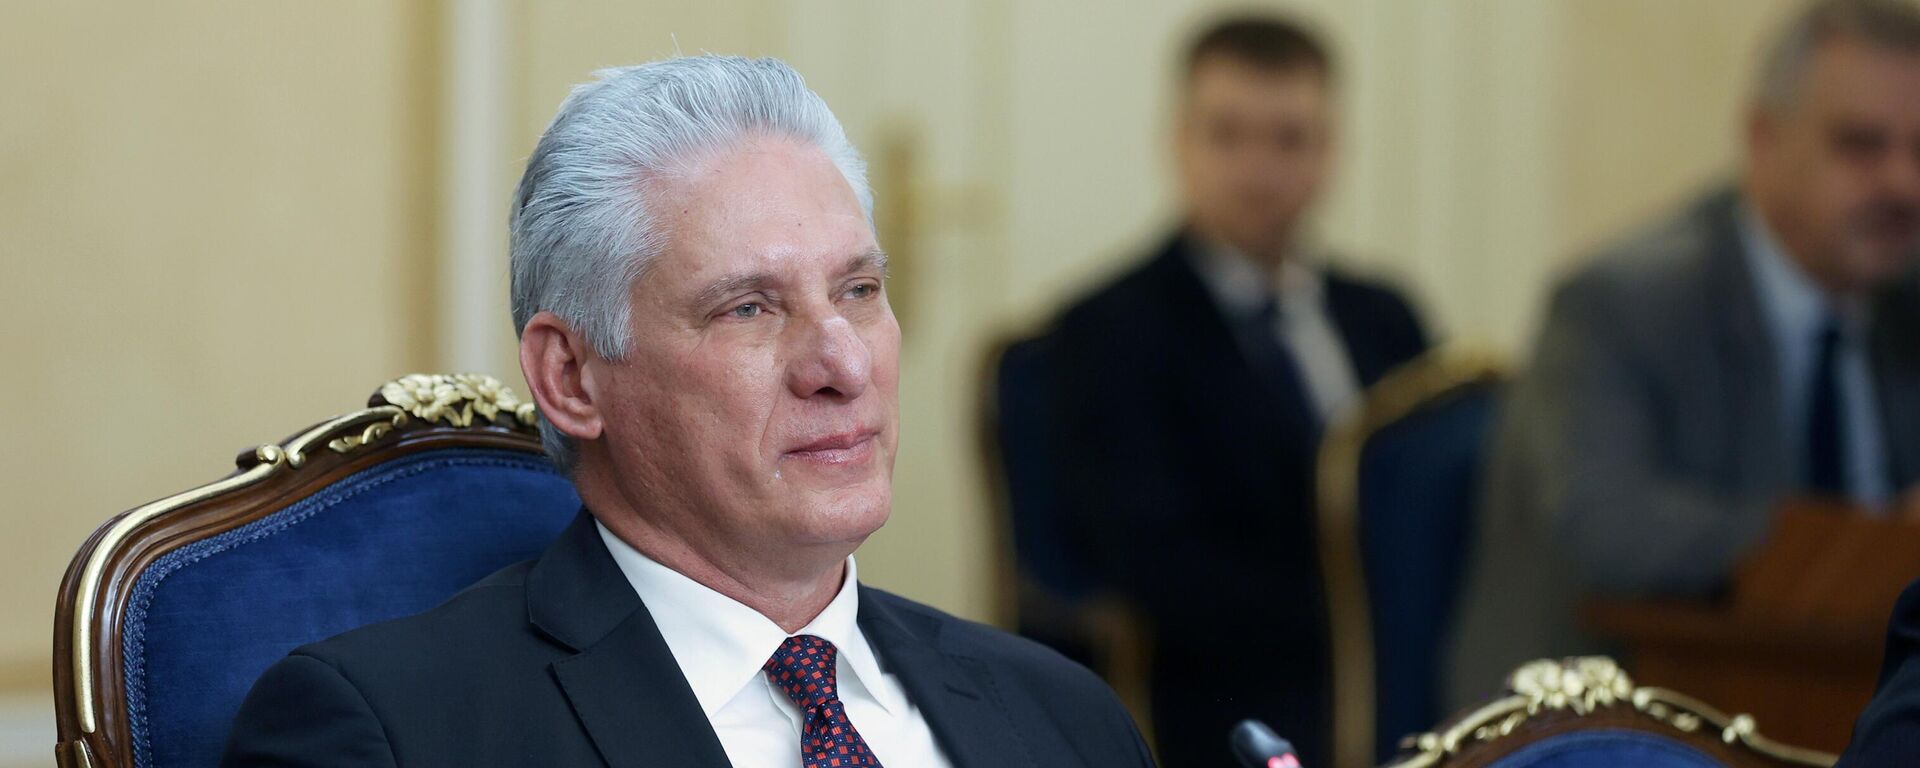 President of the Republic of Cuba Miguel Diaz-Canel Bermudez at a meeting with Chairman of the Federation Council of the Russian Federation Valentina Matvienko - Sputnik International, 1920, 24.08.2023